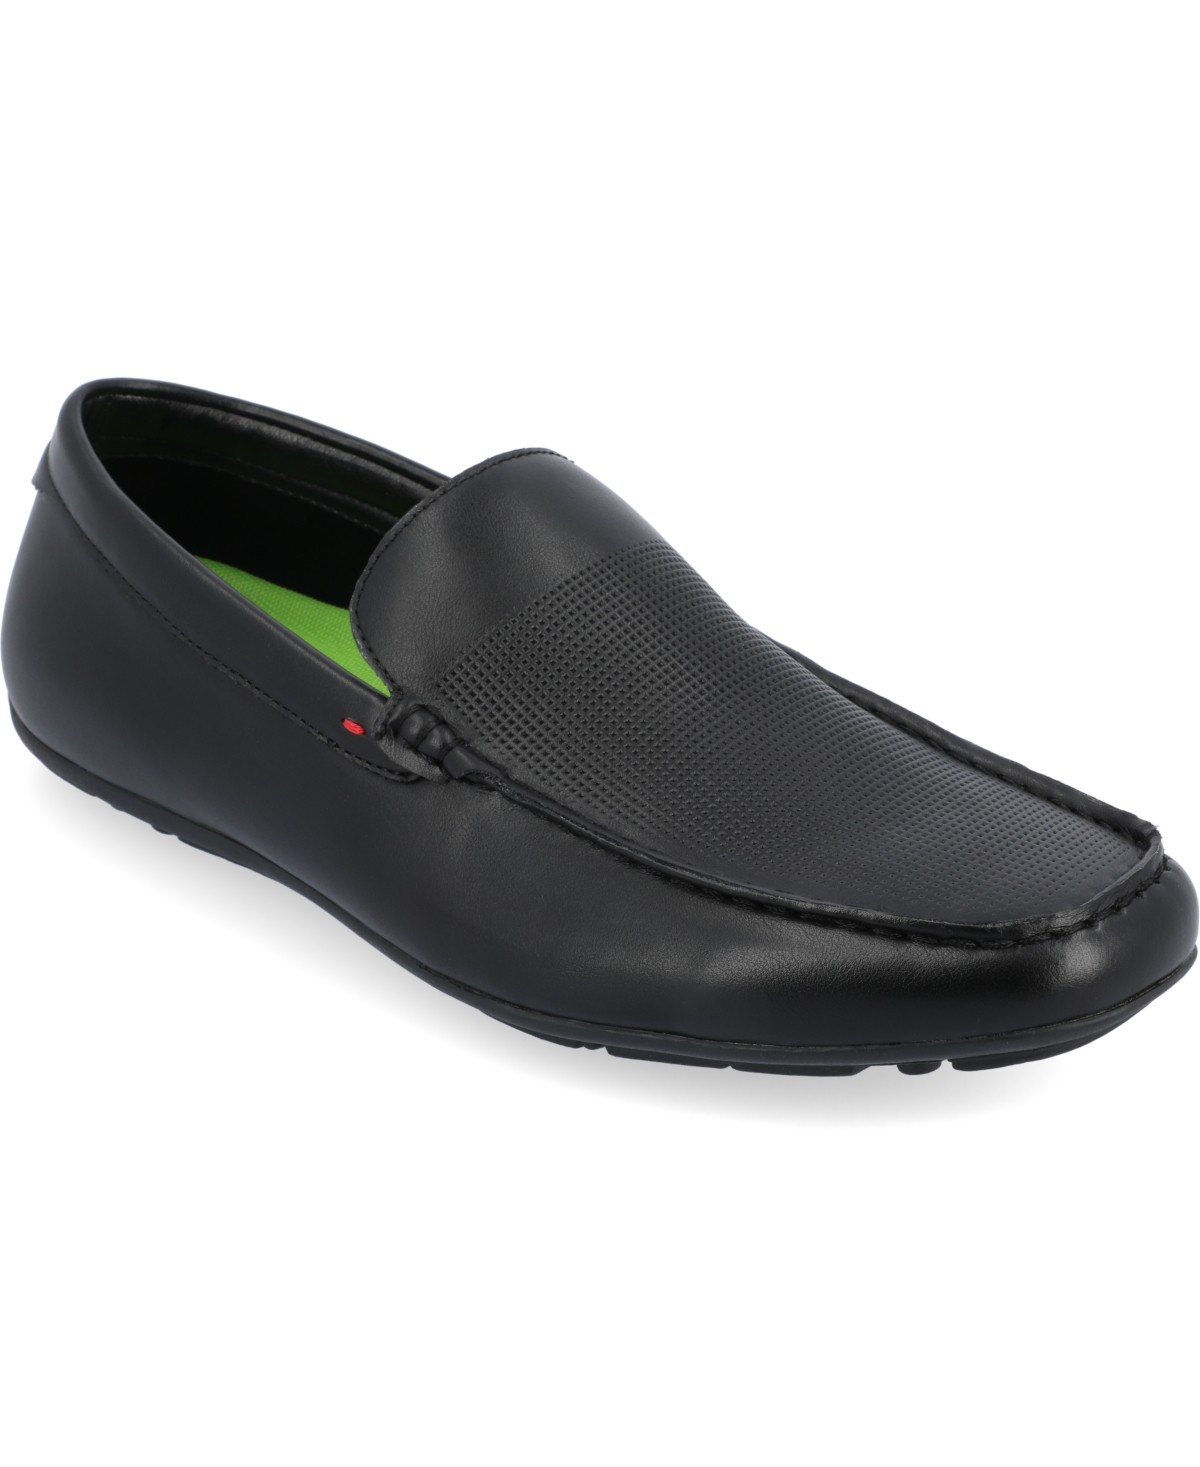 Men's Mitch Driving Loafers - Navy